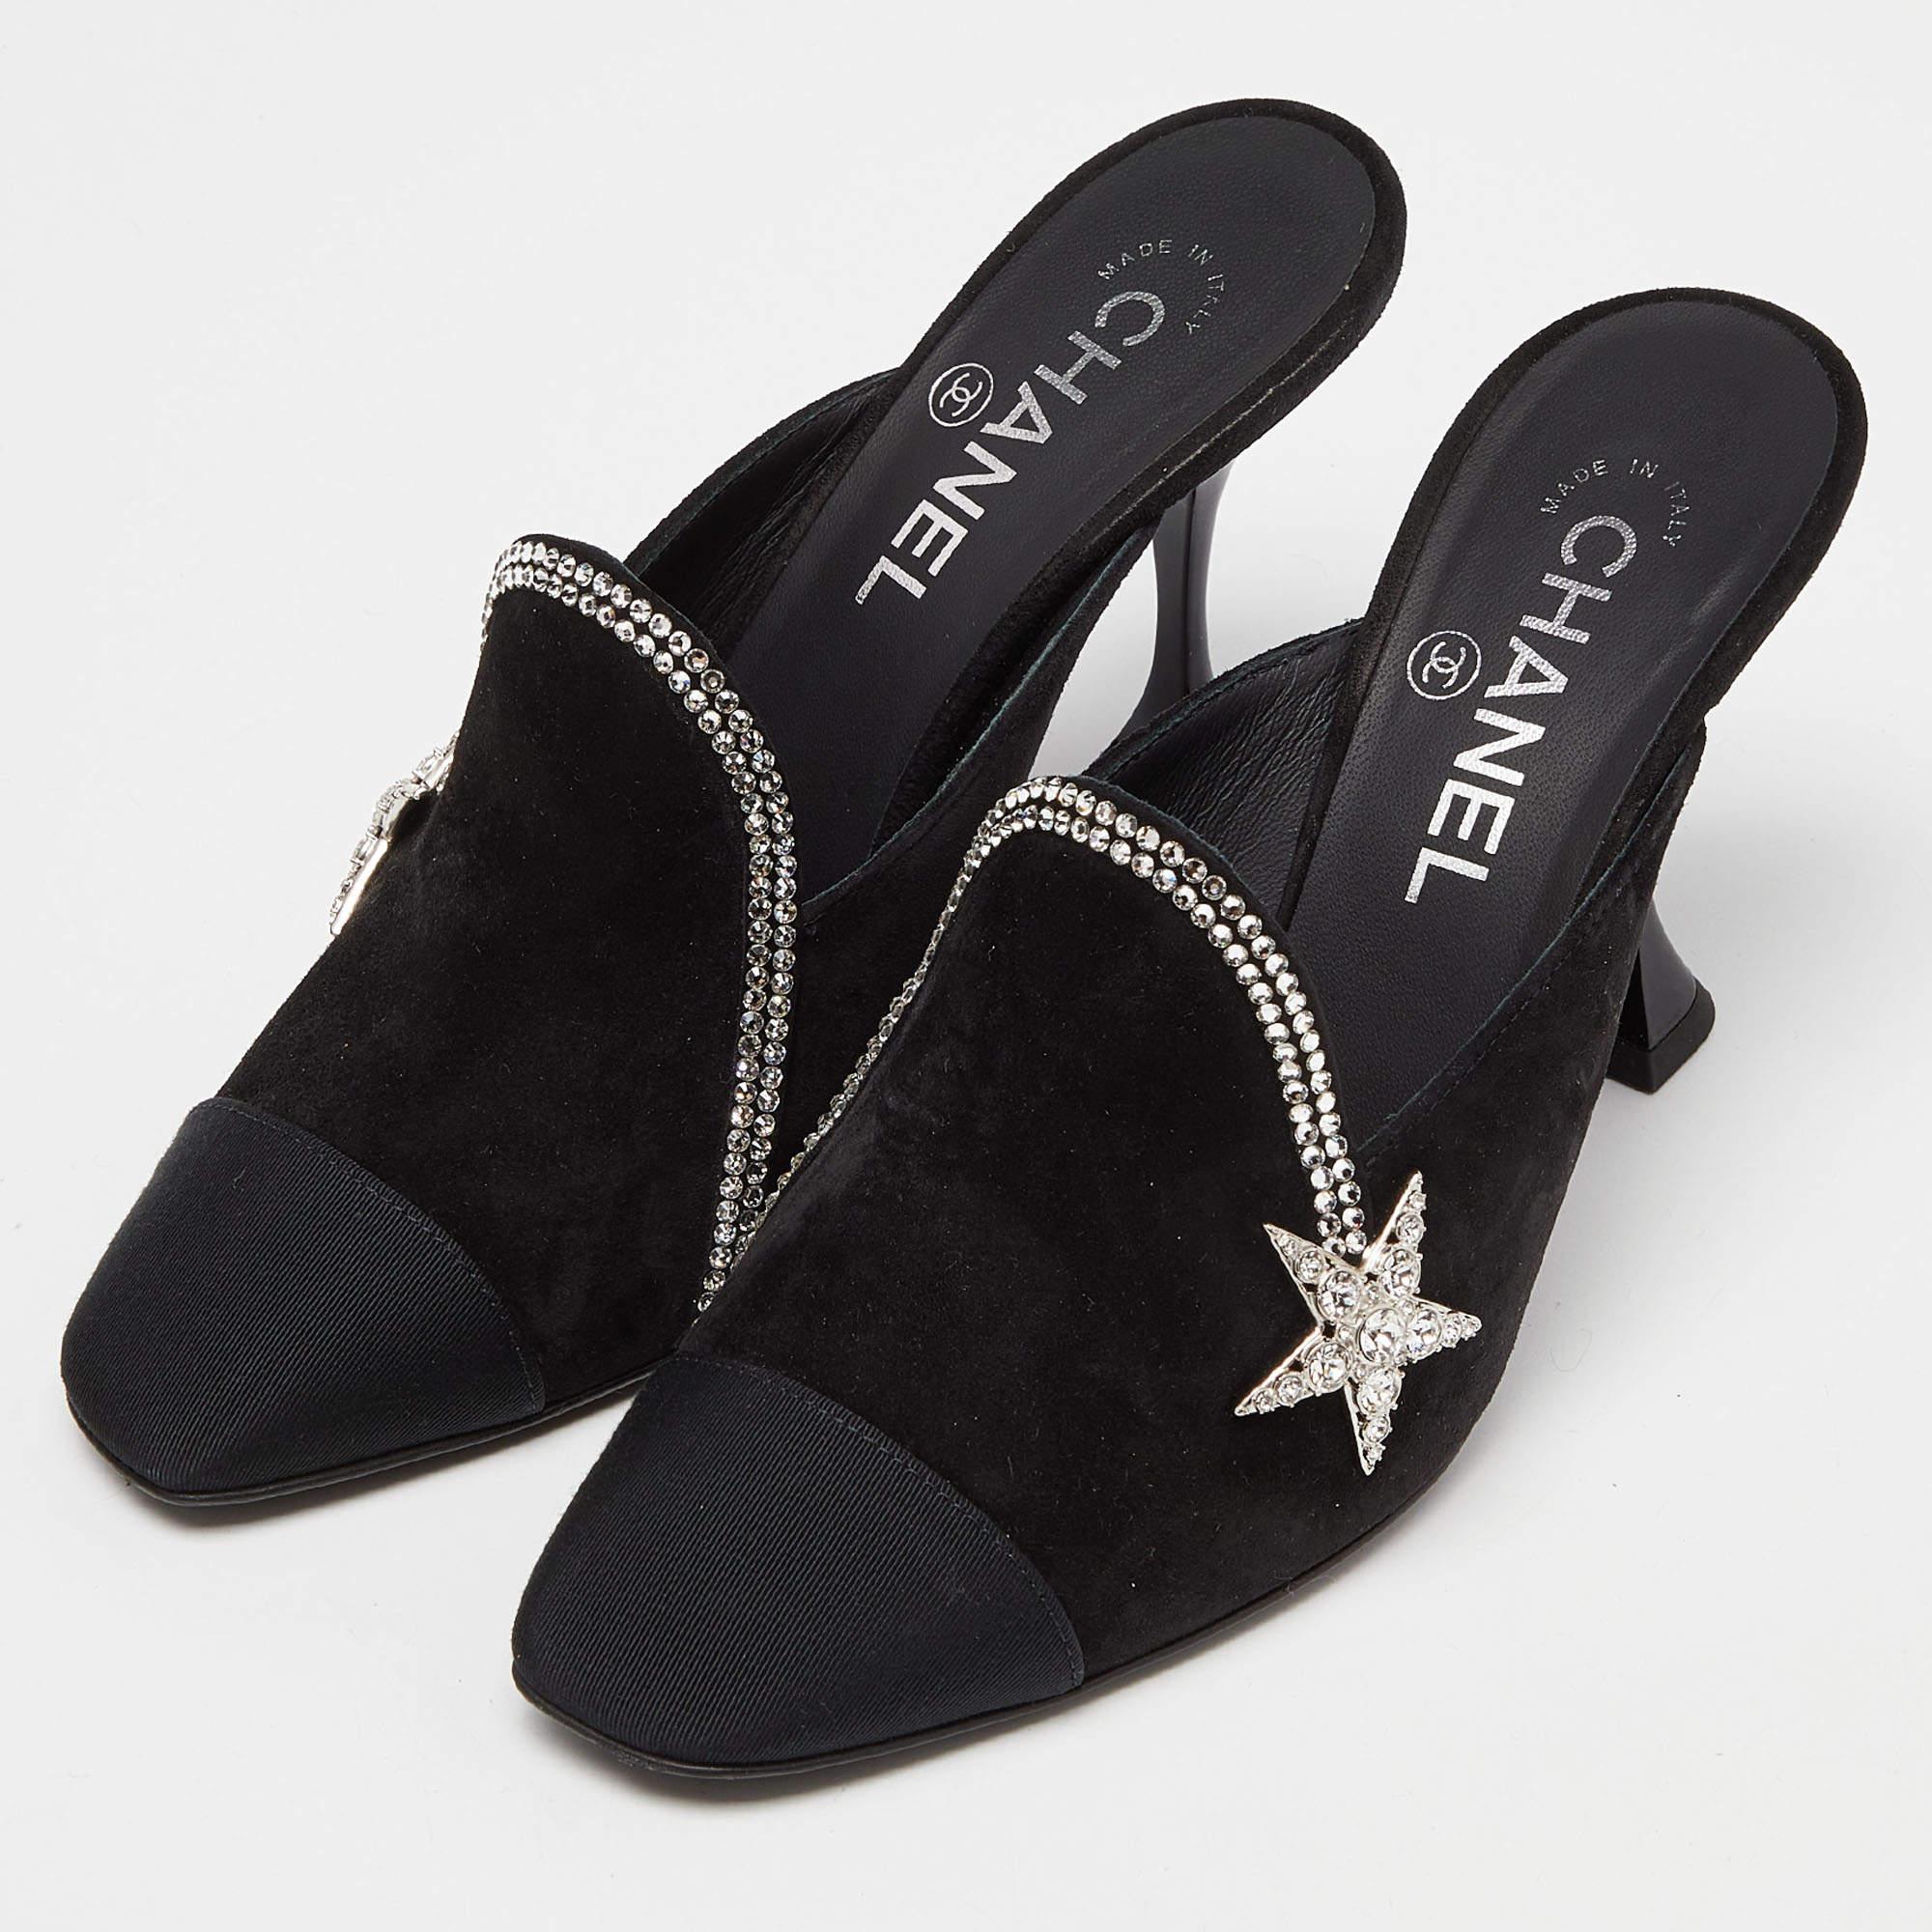 Women's Chanel Black Suede and Grosgrain Crystal Star Mules Size 38